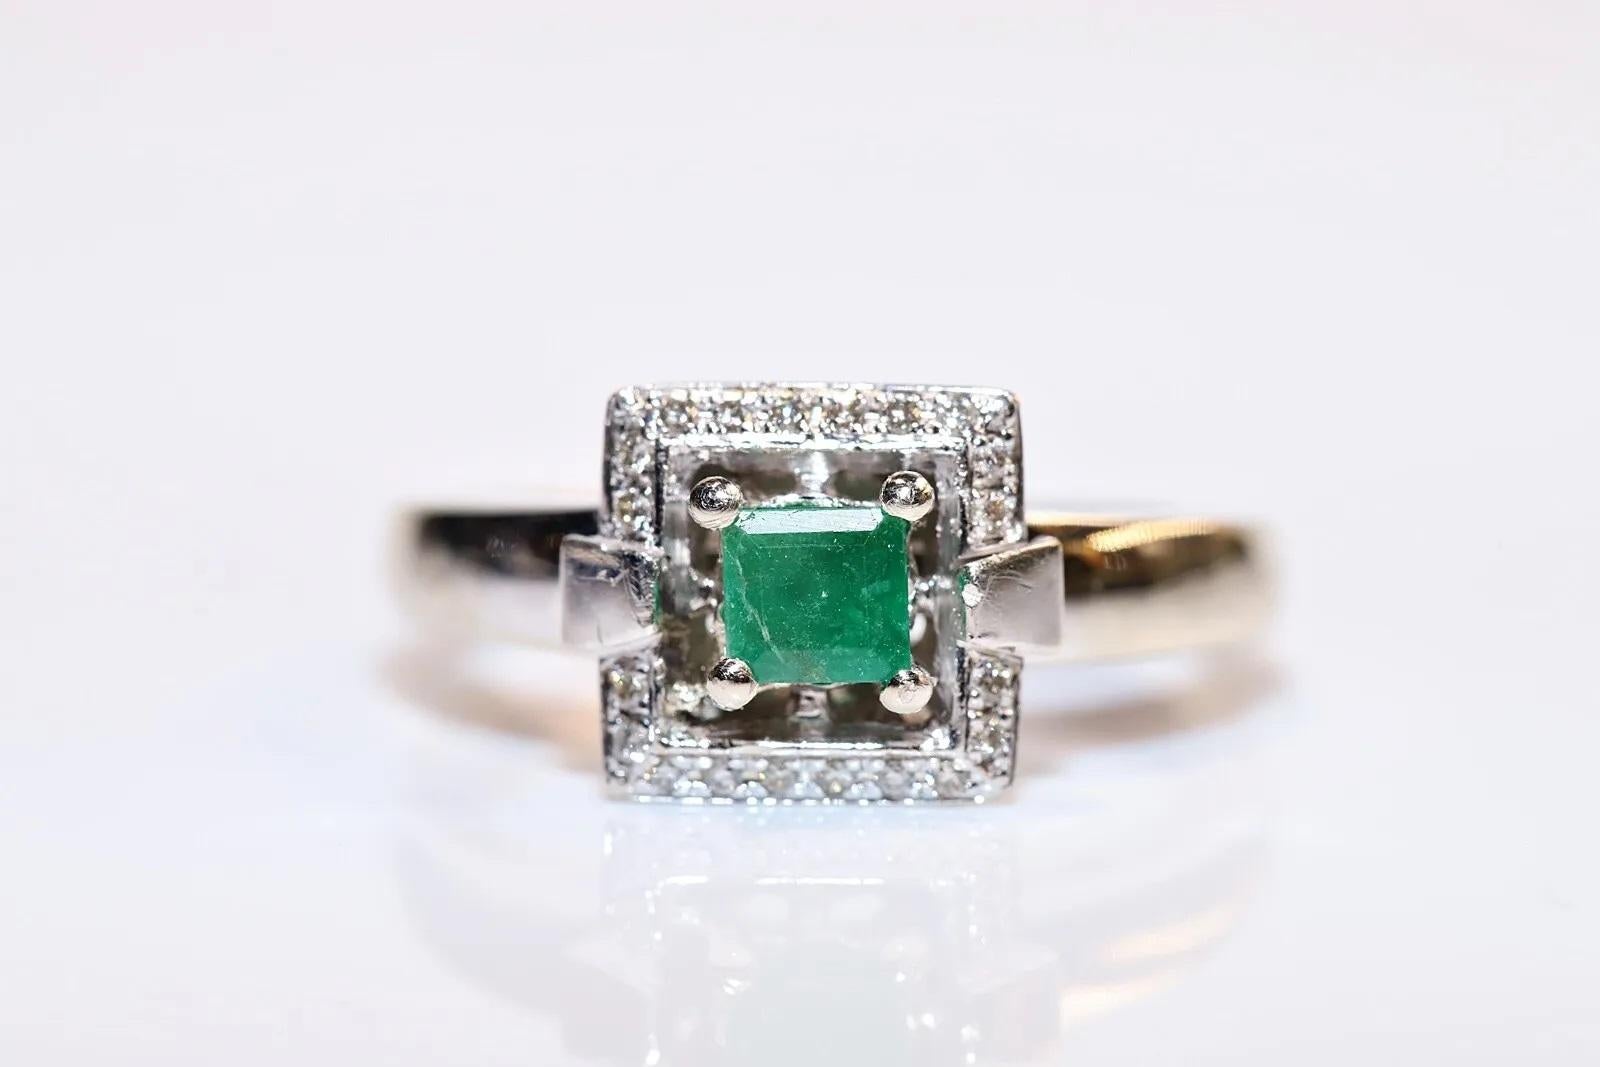 In very good condition.
Total weight is 4.3 grams.
Totally is diamond 0.20 carat.
The diamond is has  G-H-I-J color and vs-s1 clarity.
Totally is emerald 0.25 carat.
Ring size is US 7 (We offer free resizing)
We can make any size.
Box is not